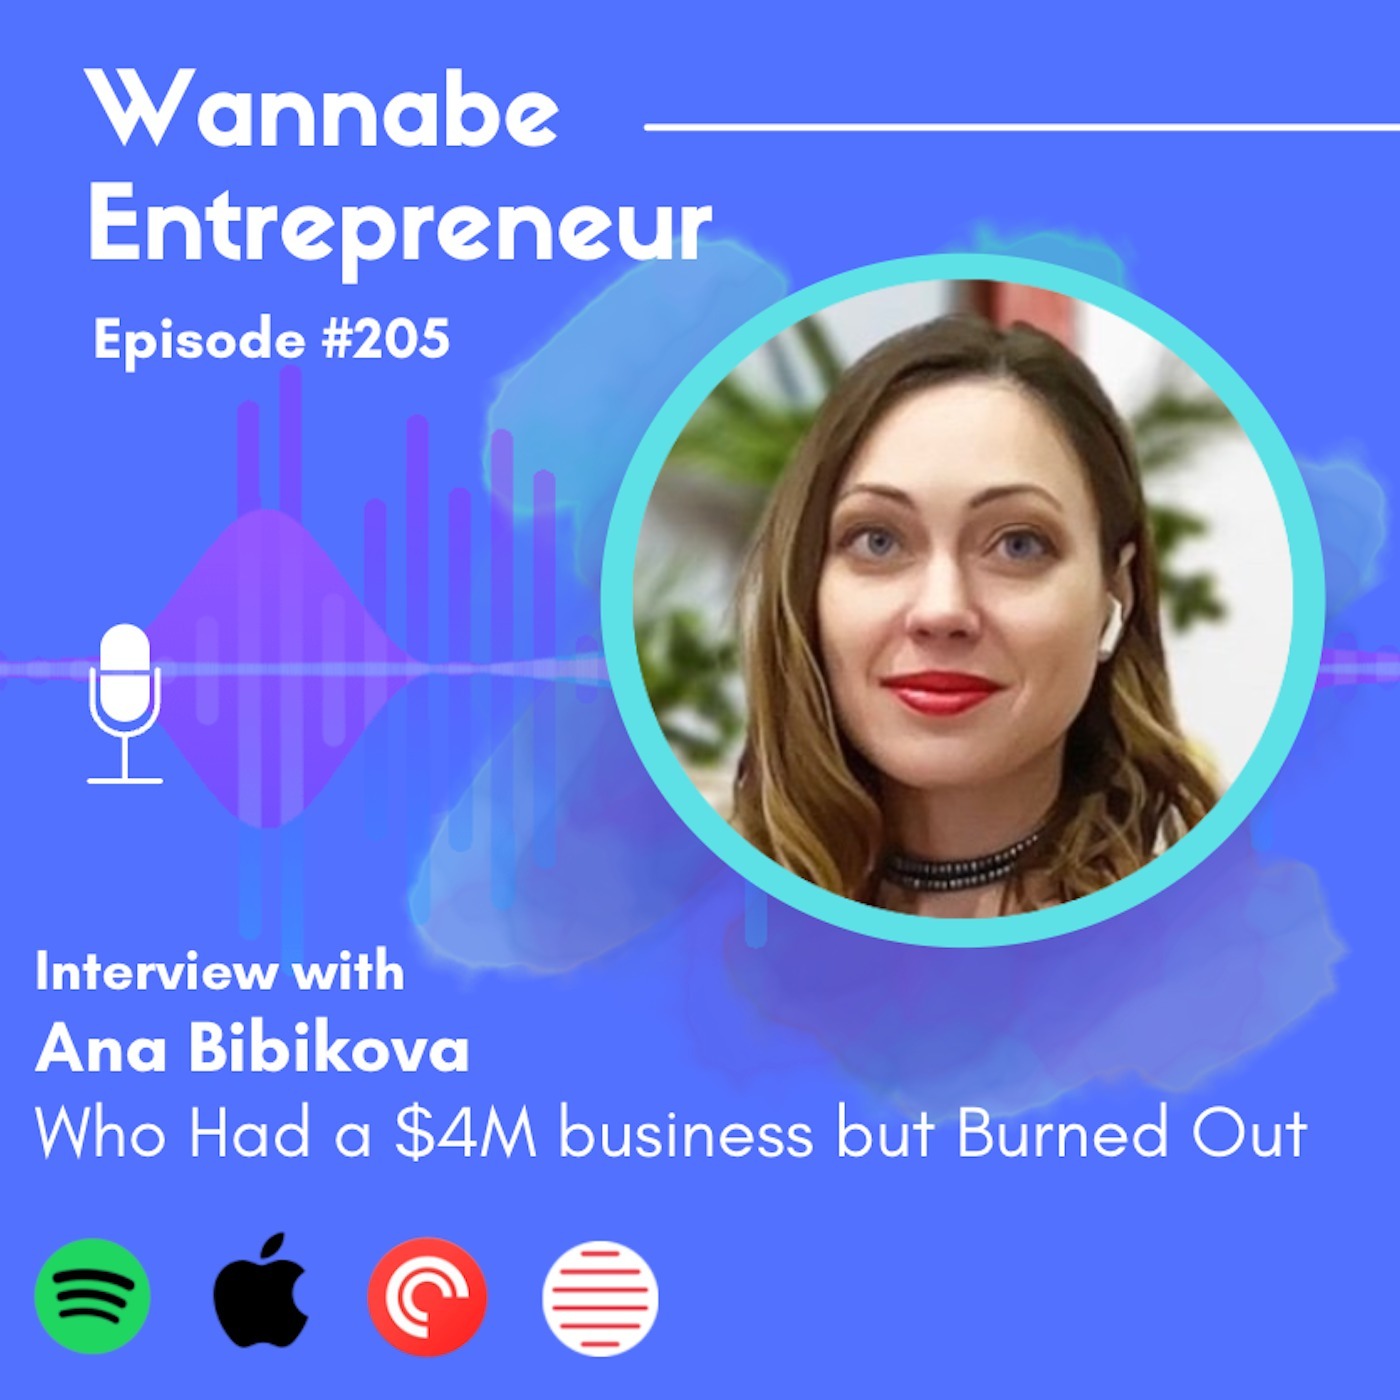 Interviewing Ana who Had a $4M business but Burned Out